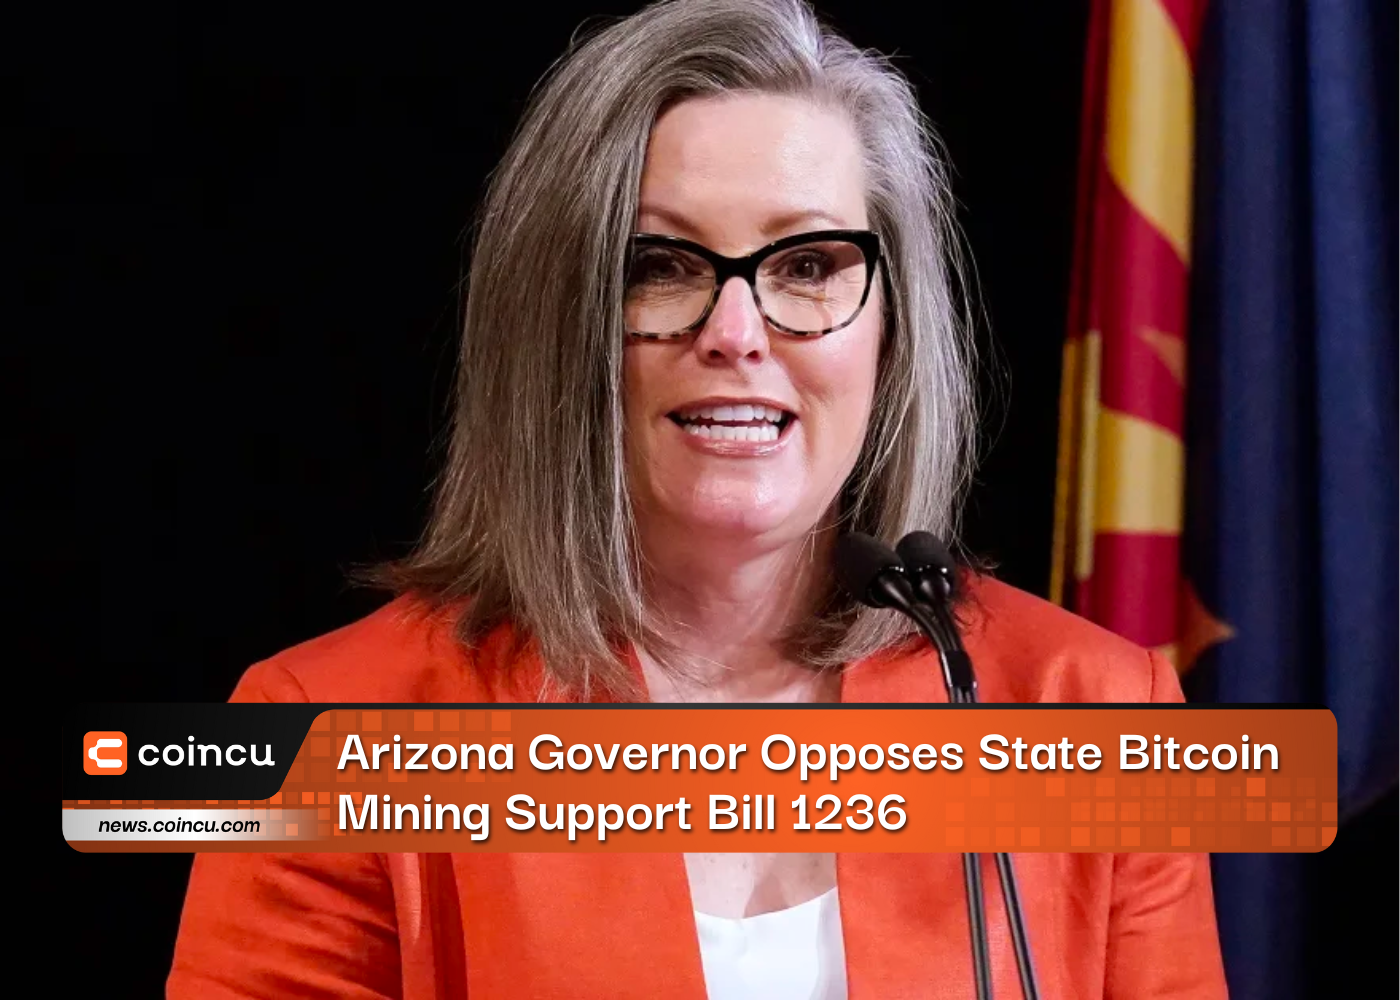 Arizona Governor Opposes State Bitcoin Mining Support Bill 1236